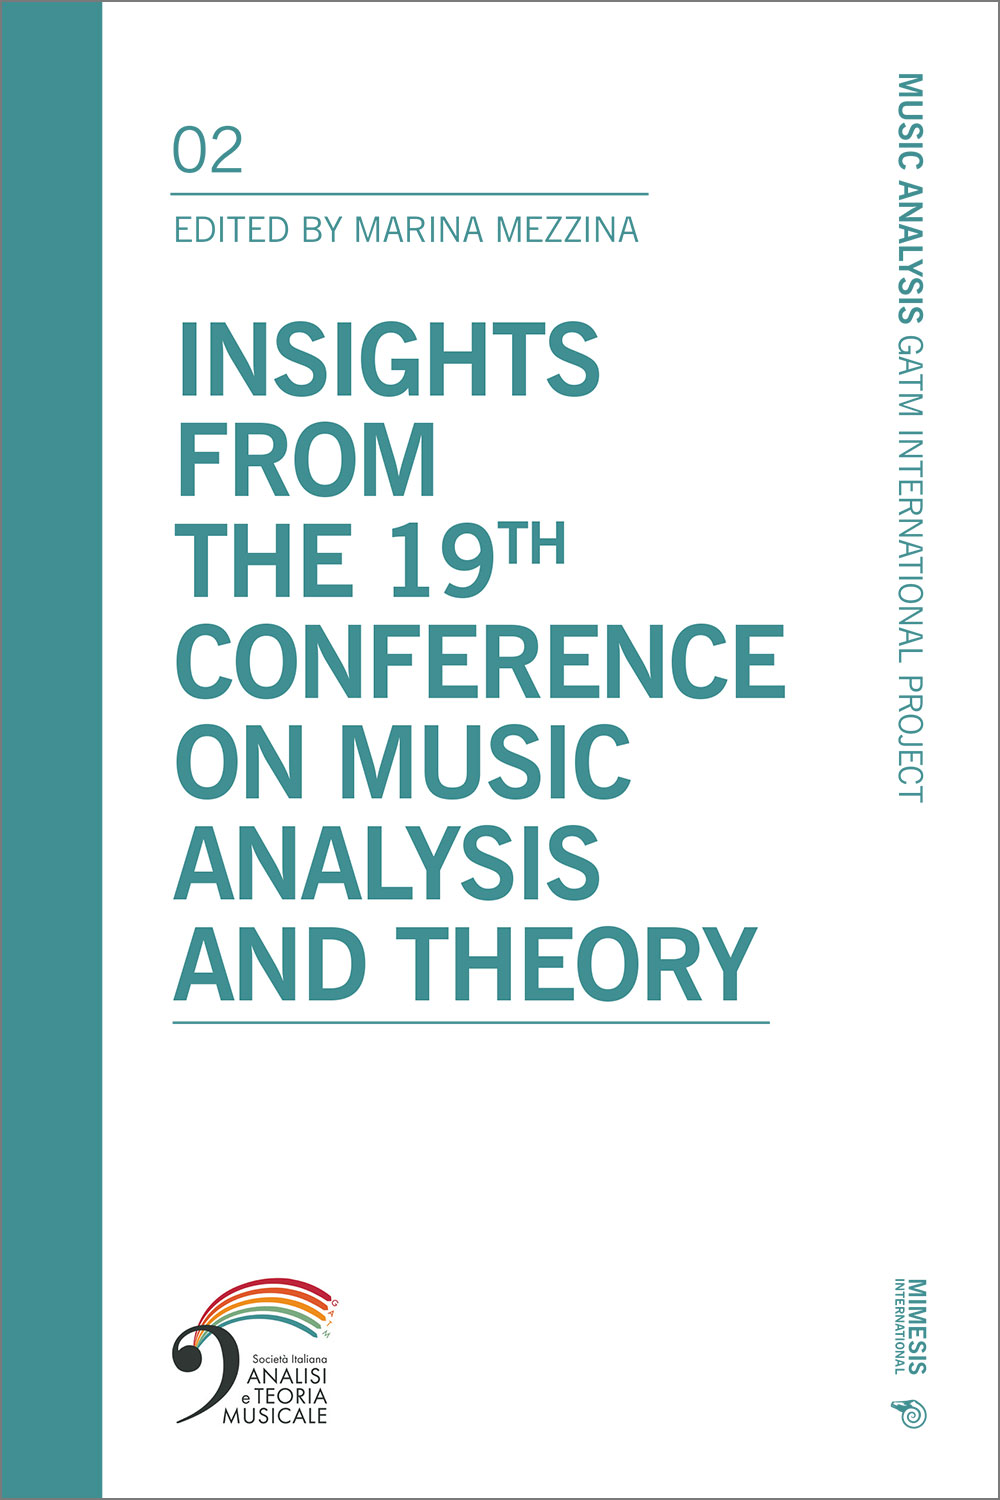 Insights From the 19th Conference on Music Analysis and Theory